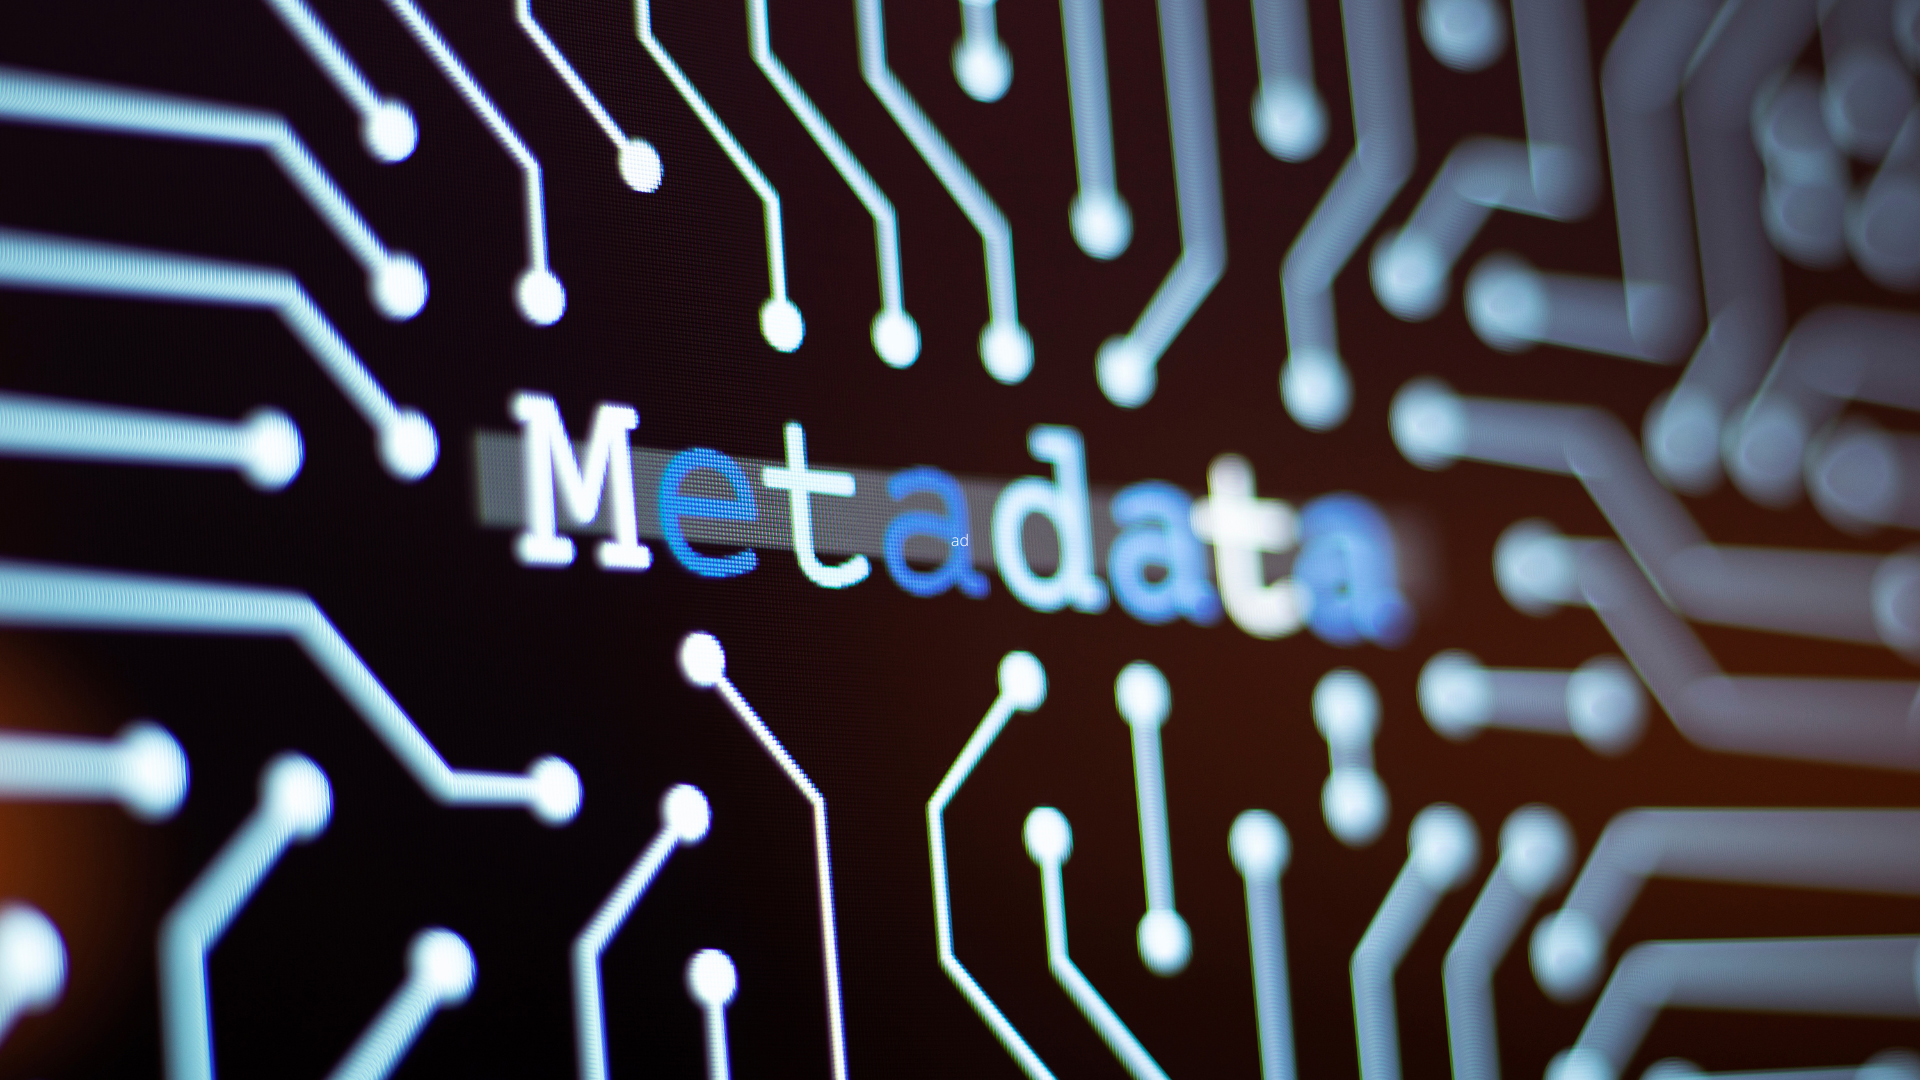 A picture of a circuit board with the word Metadata printed across it.